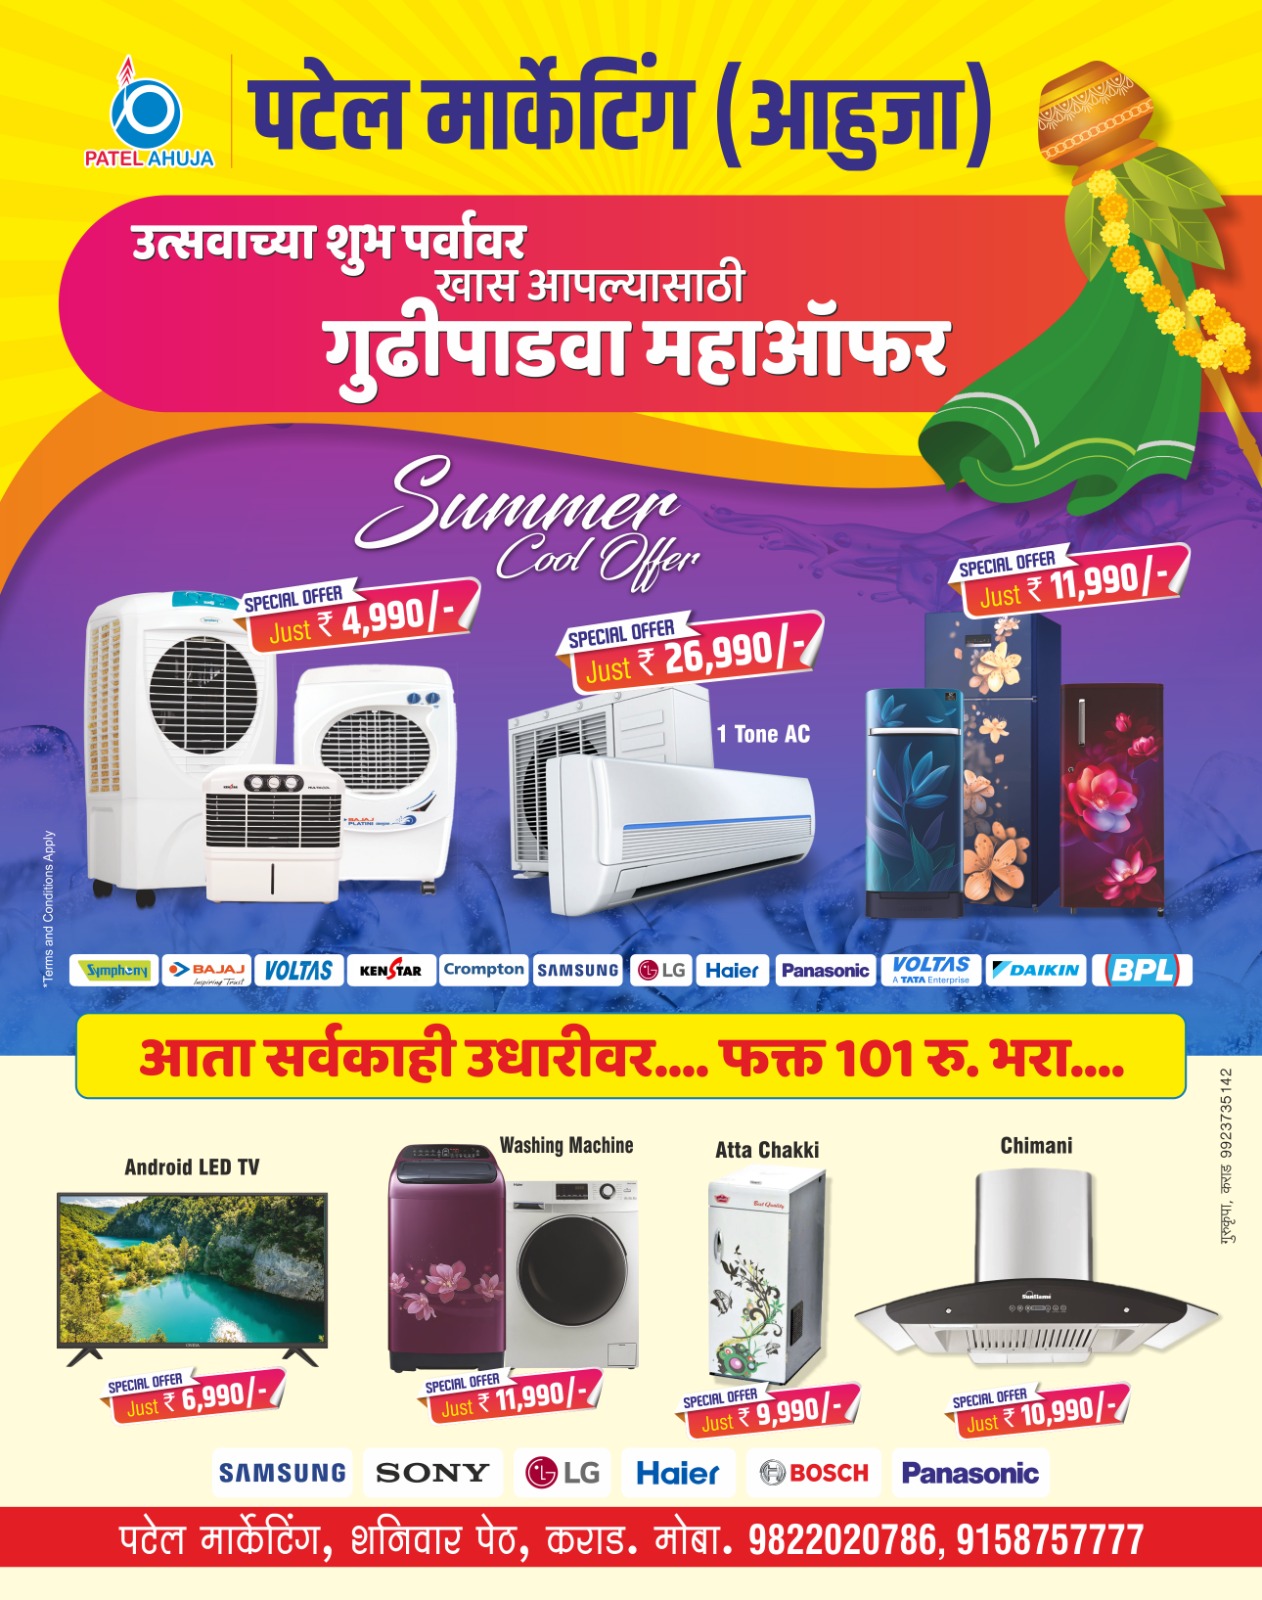 Special Offer ahuja patel electronics 